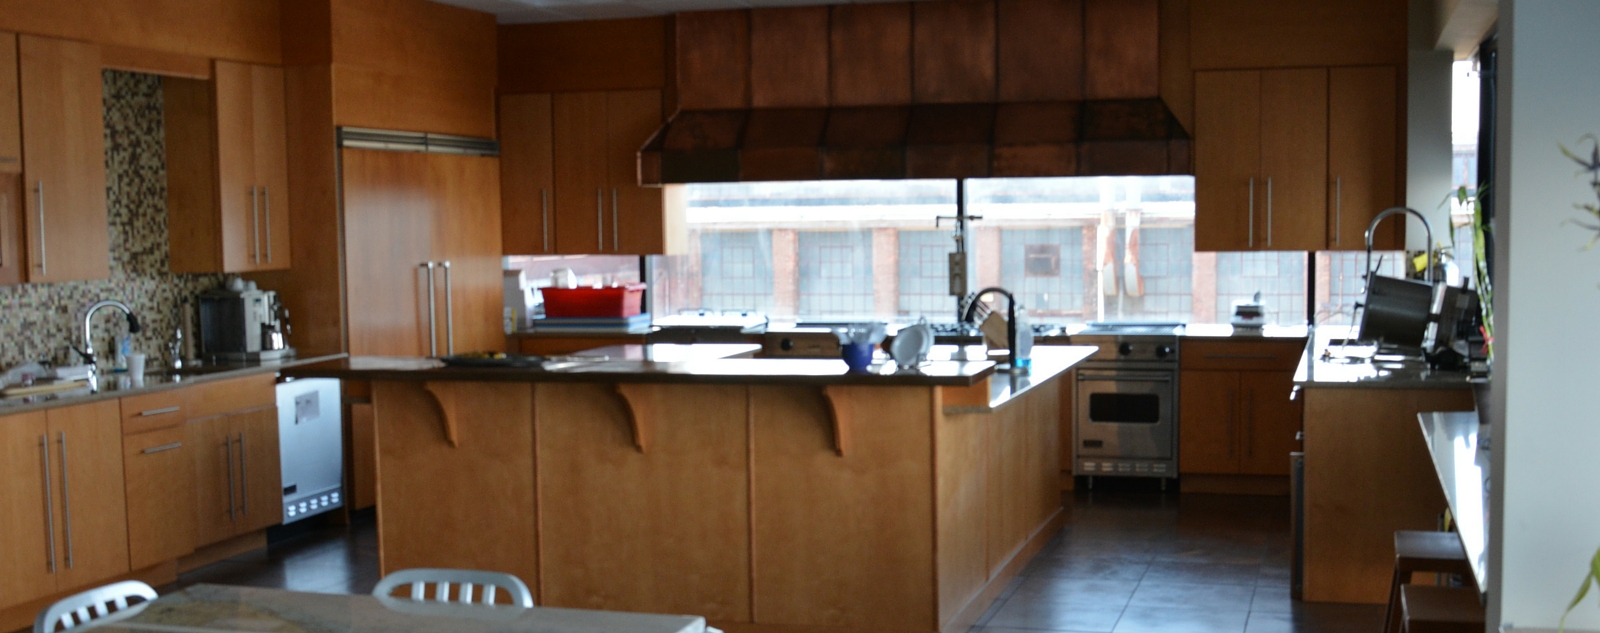 A large state-of the-art test kitchen